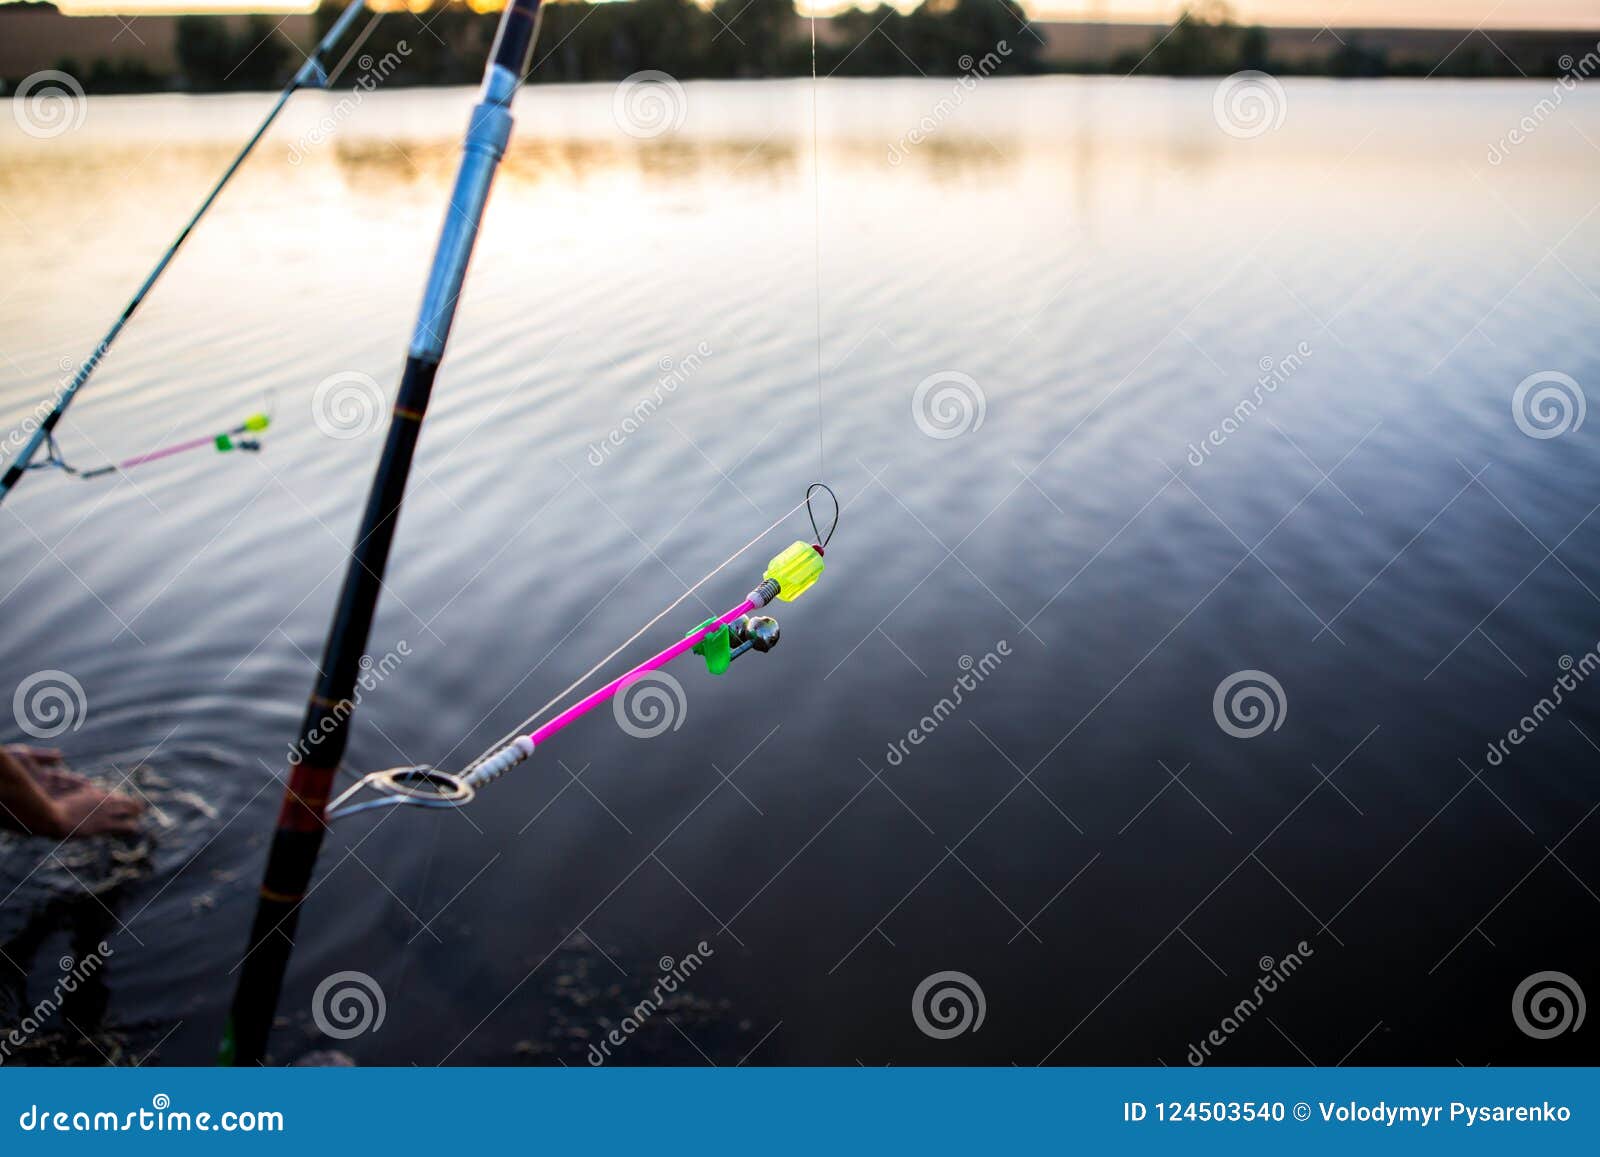 Bells for Fish Bites on Fishing Rod Against Background of Lake